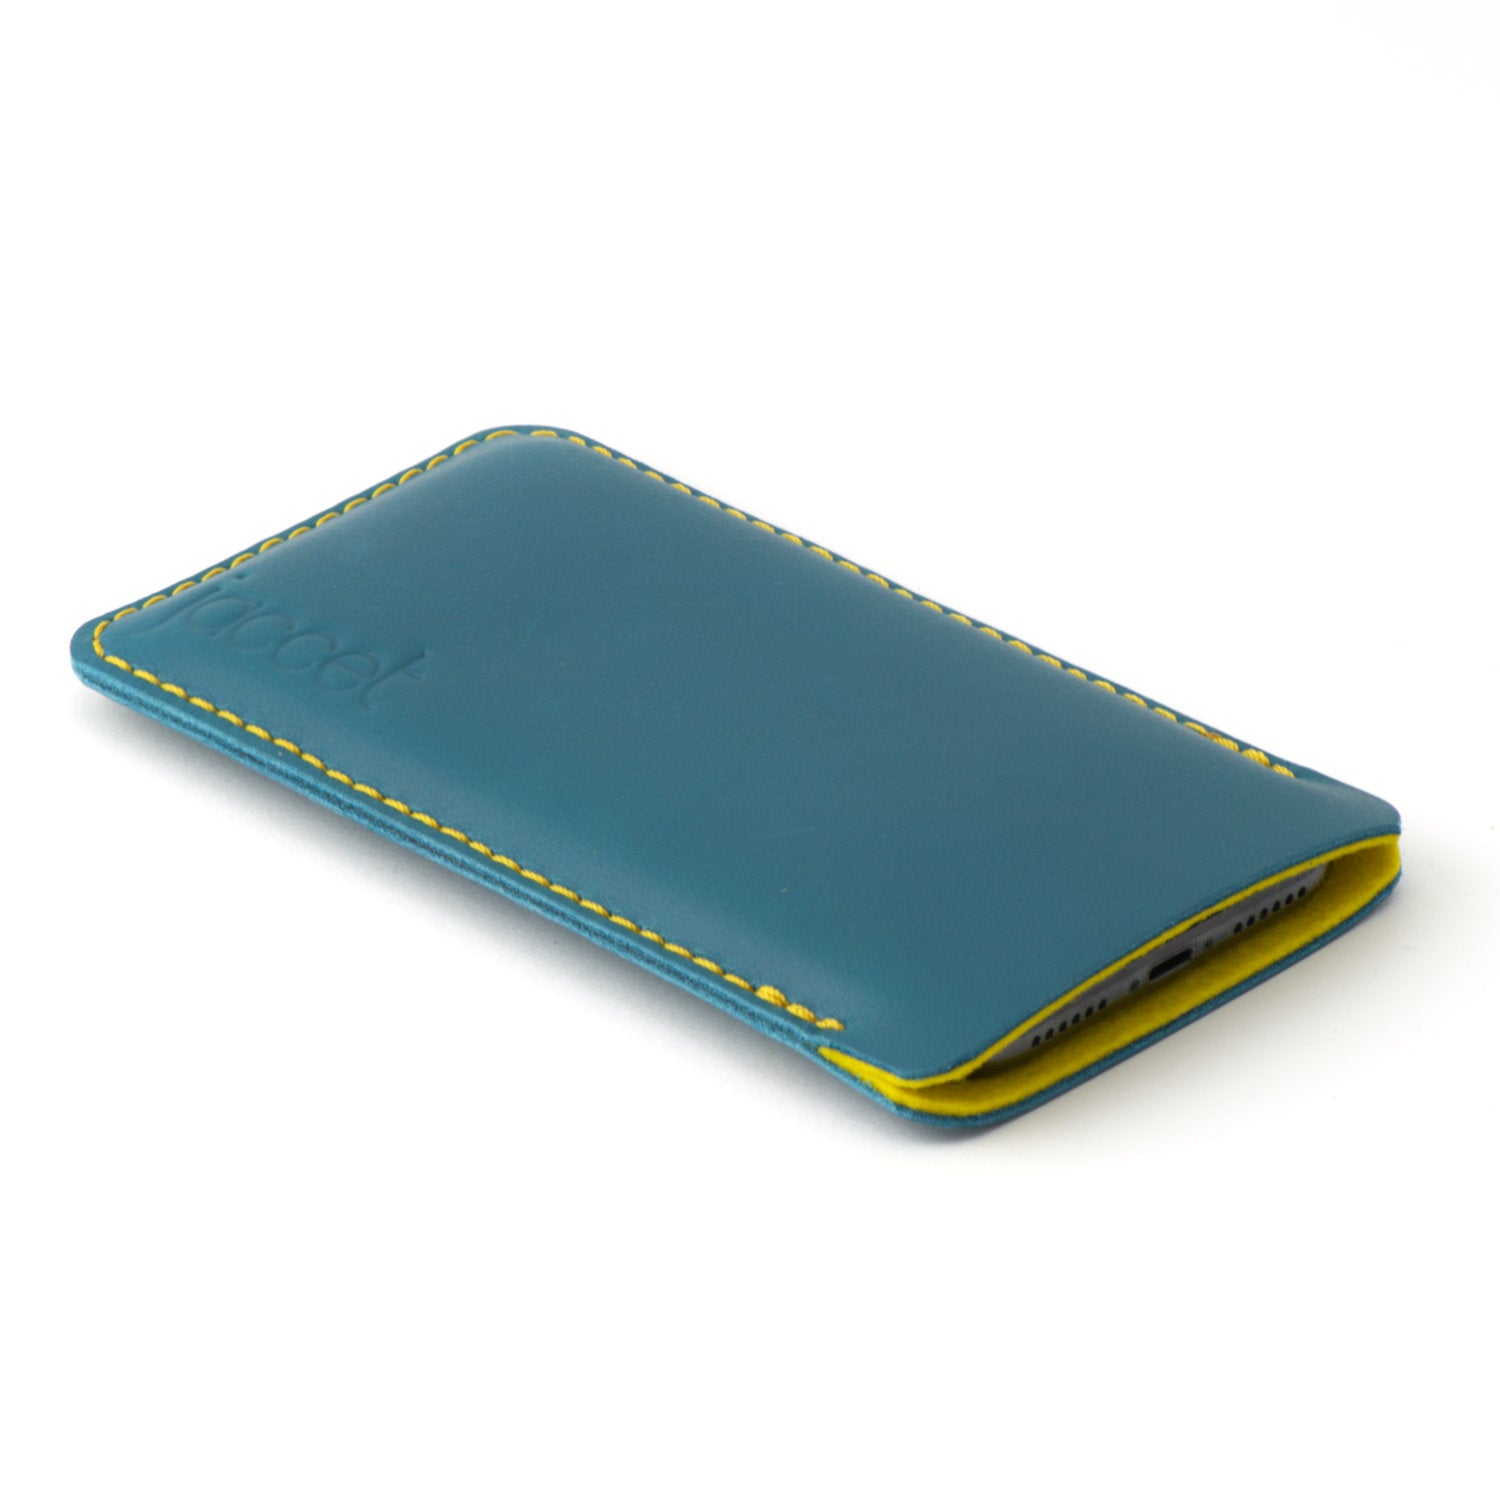 Full-grain leather iPhone sleeve - Turquoise leather with yellow wolvilt - 100% handmade